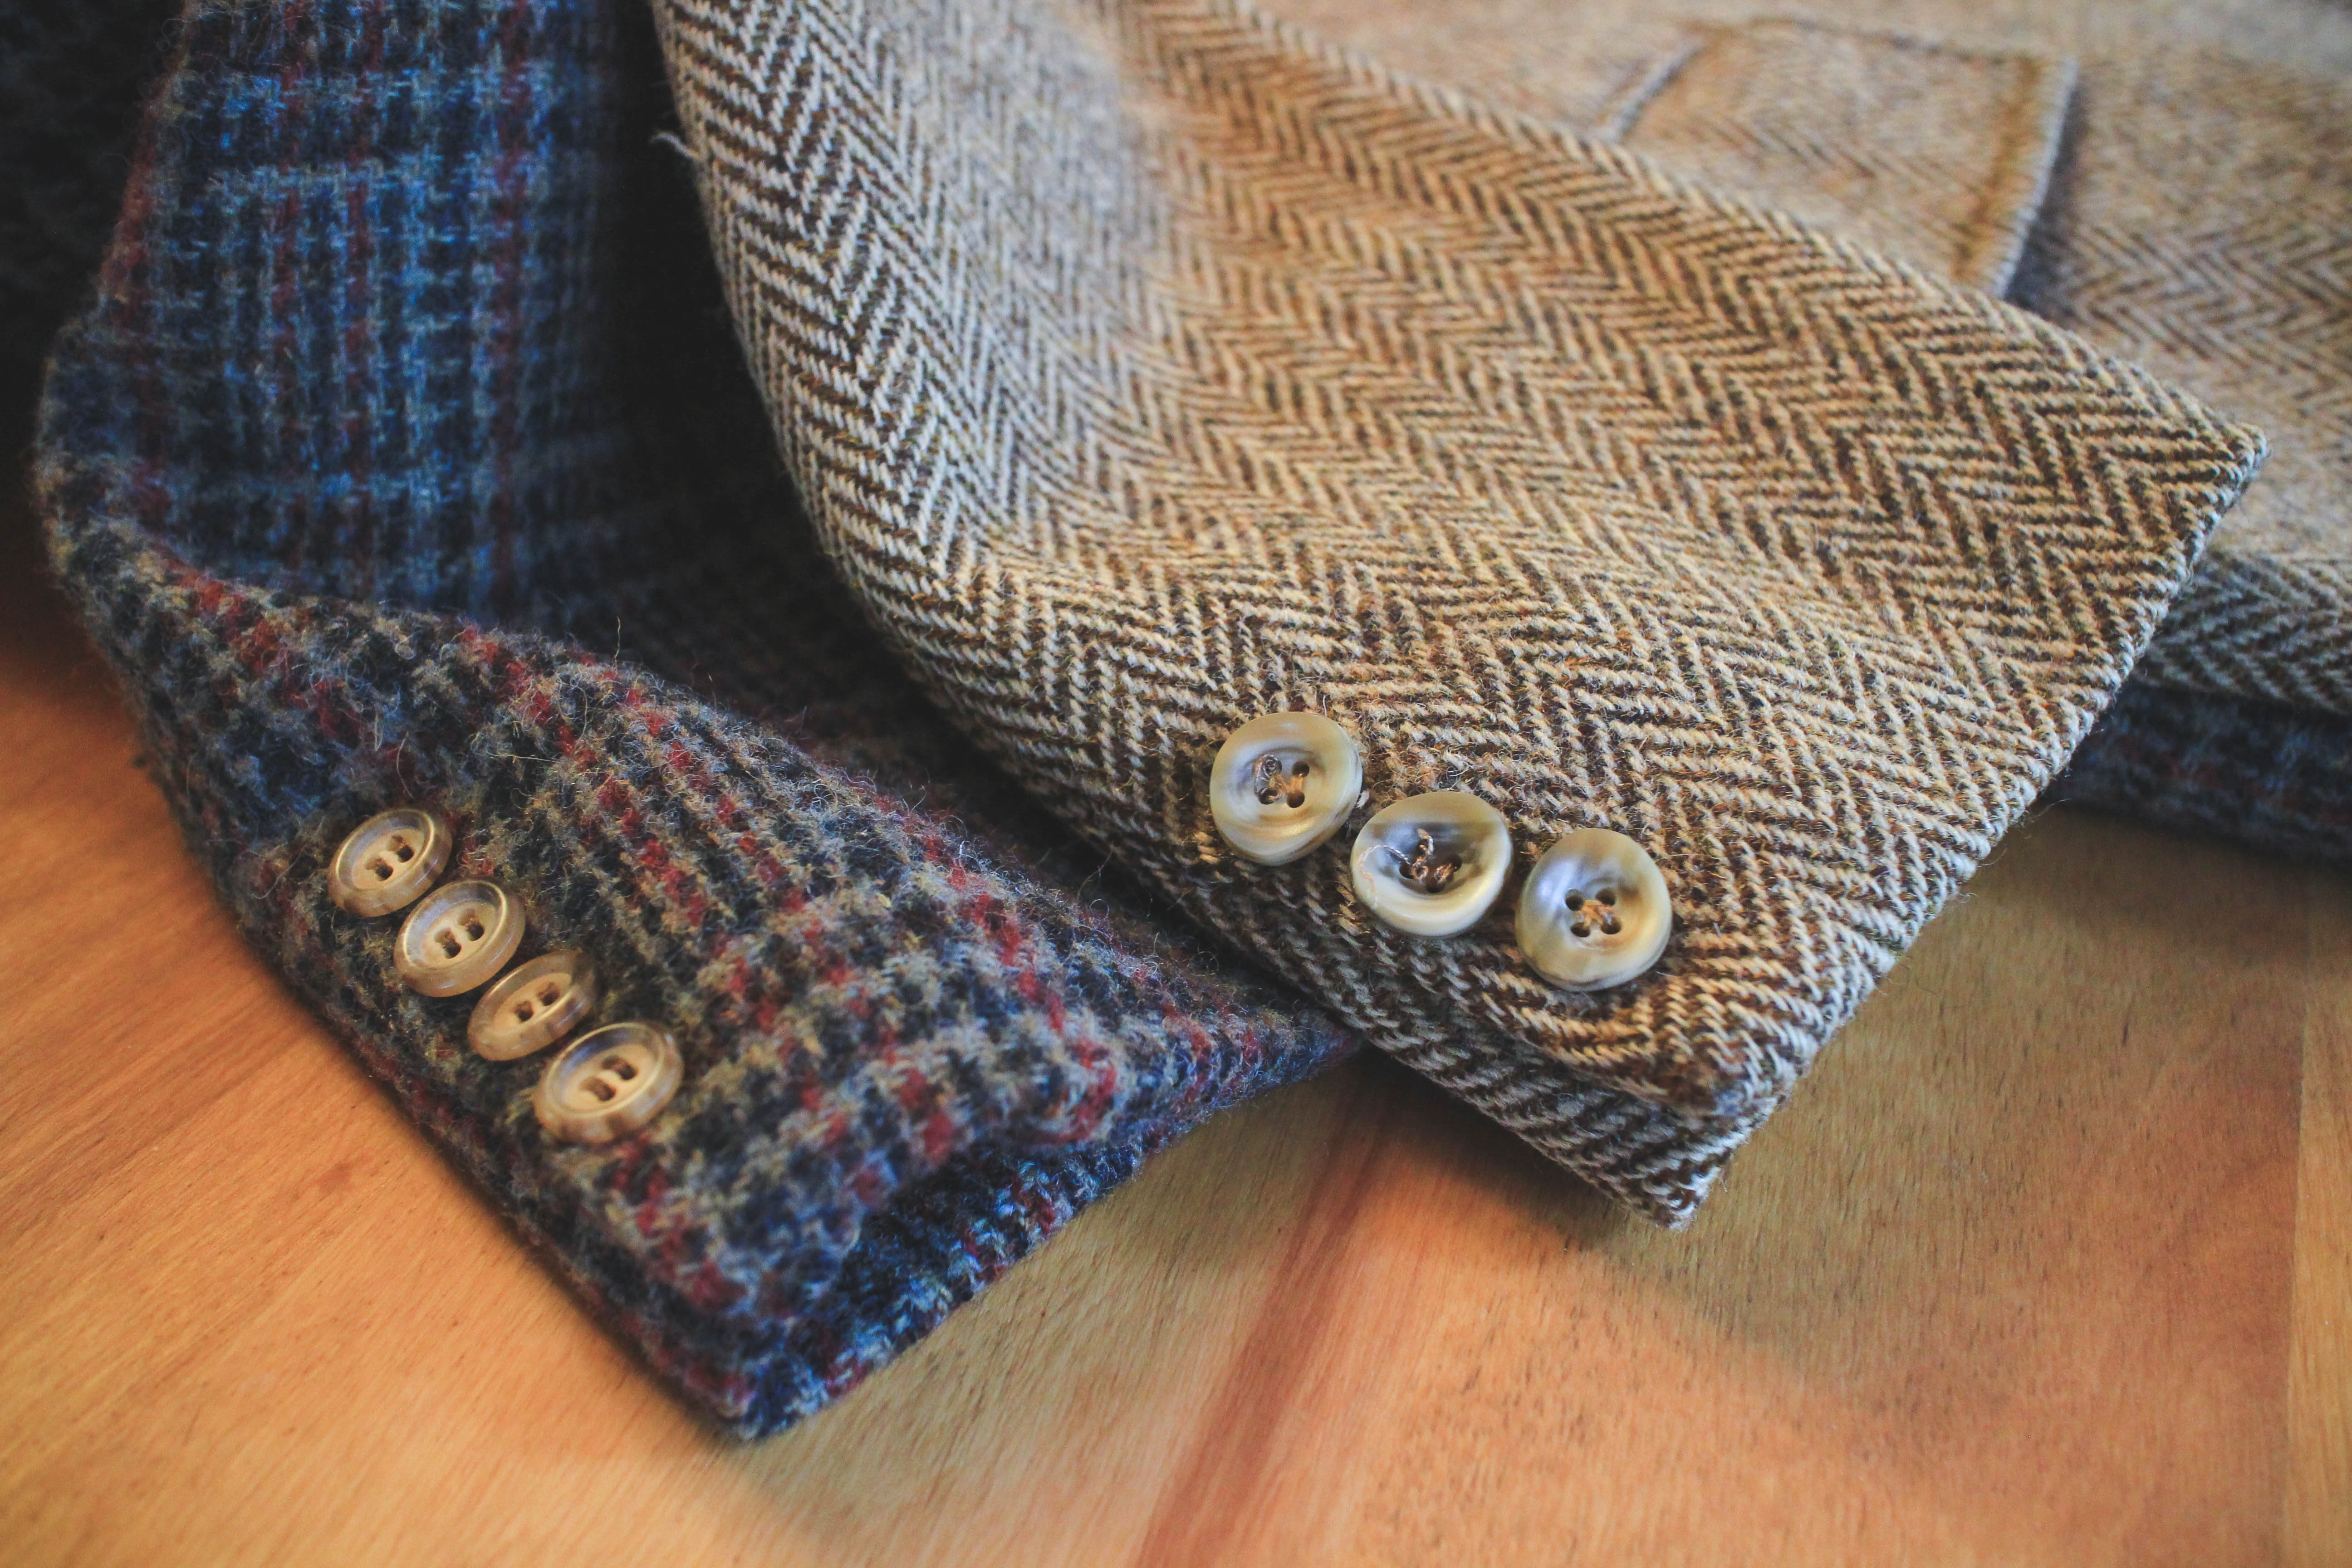 What's so Great About Tweed? | The Styleforum JournalThe Styleforum Journal